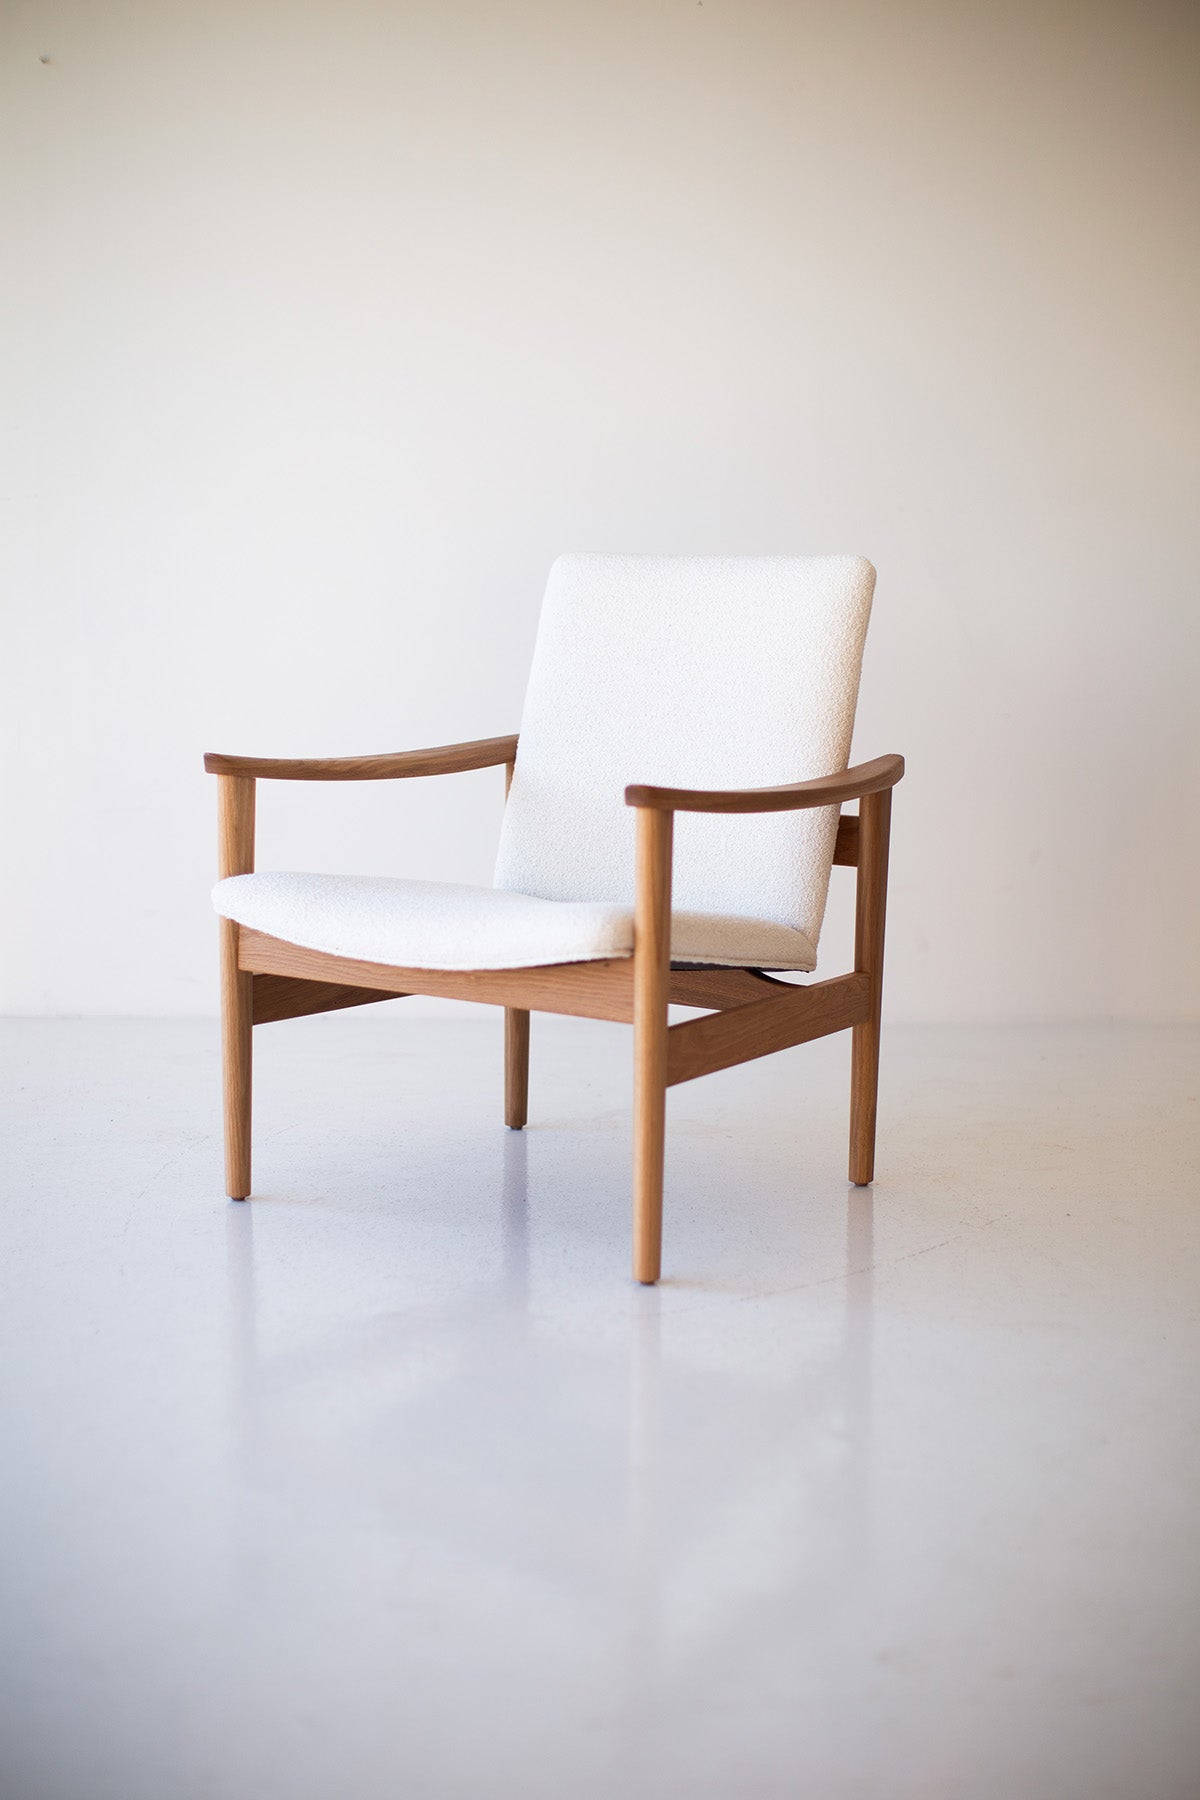 Lawrence-Peabody-Oak-Occasional-Chair-08